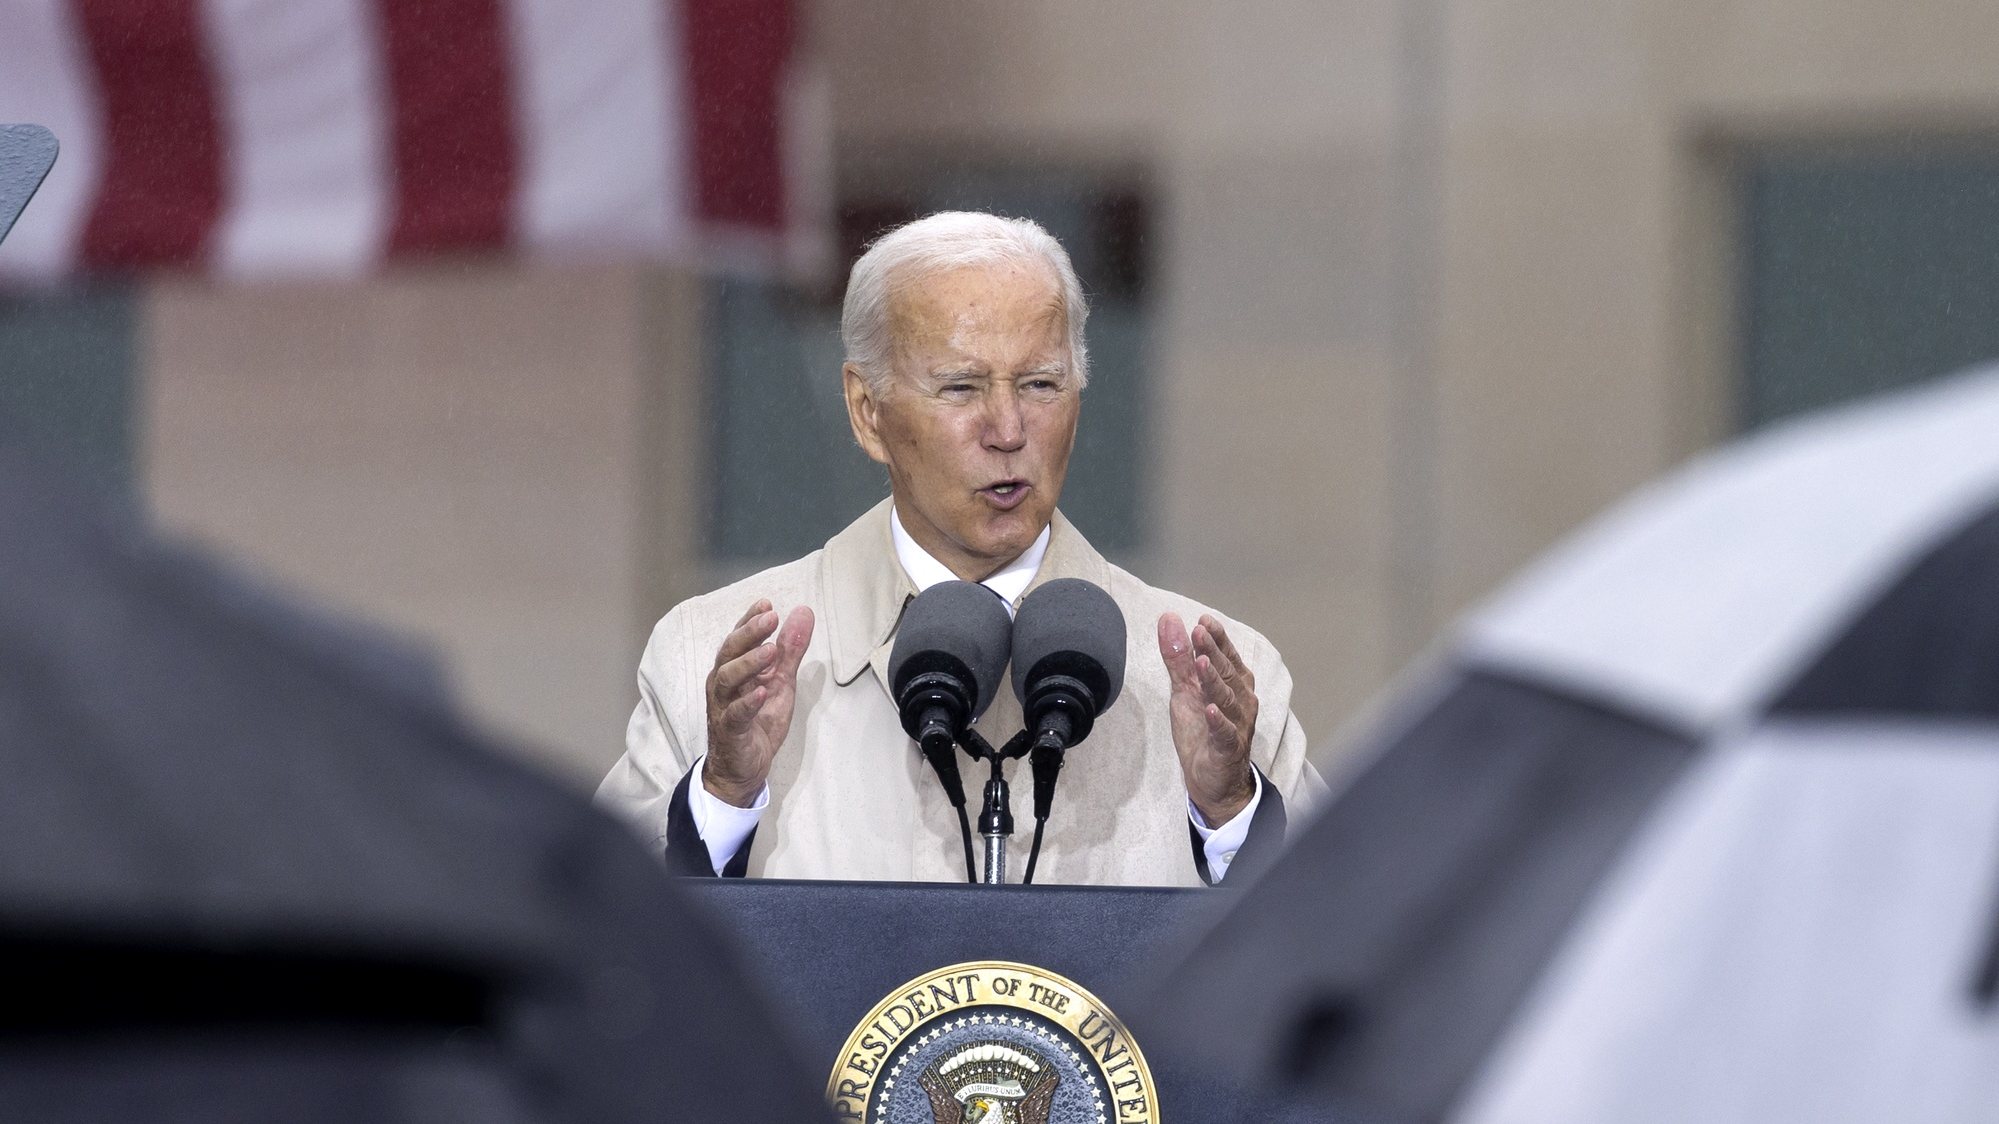 epa10177958 US President Joe Biden delivers remarks during an observance ceremony for the 21st anniversary of the 9/11 attacks, at the Pentagon in Arlington, Virginia, USA, 11 September 2022. The 21st anniversary of the worst terrorist attack on US soil is being observed at several locations in the United States.  EPA/MICHAEL REYNOLDS